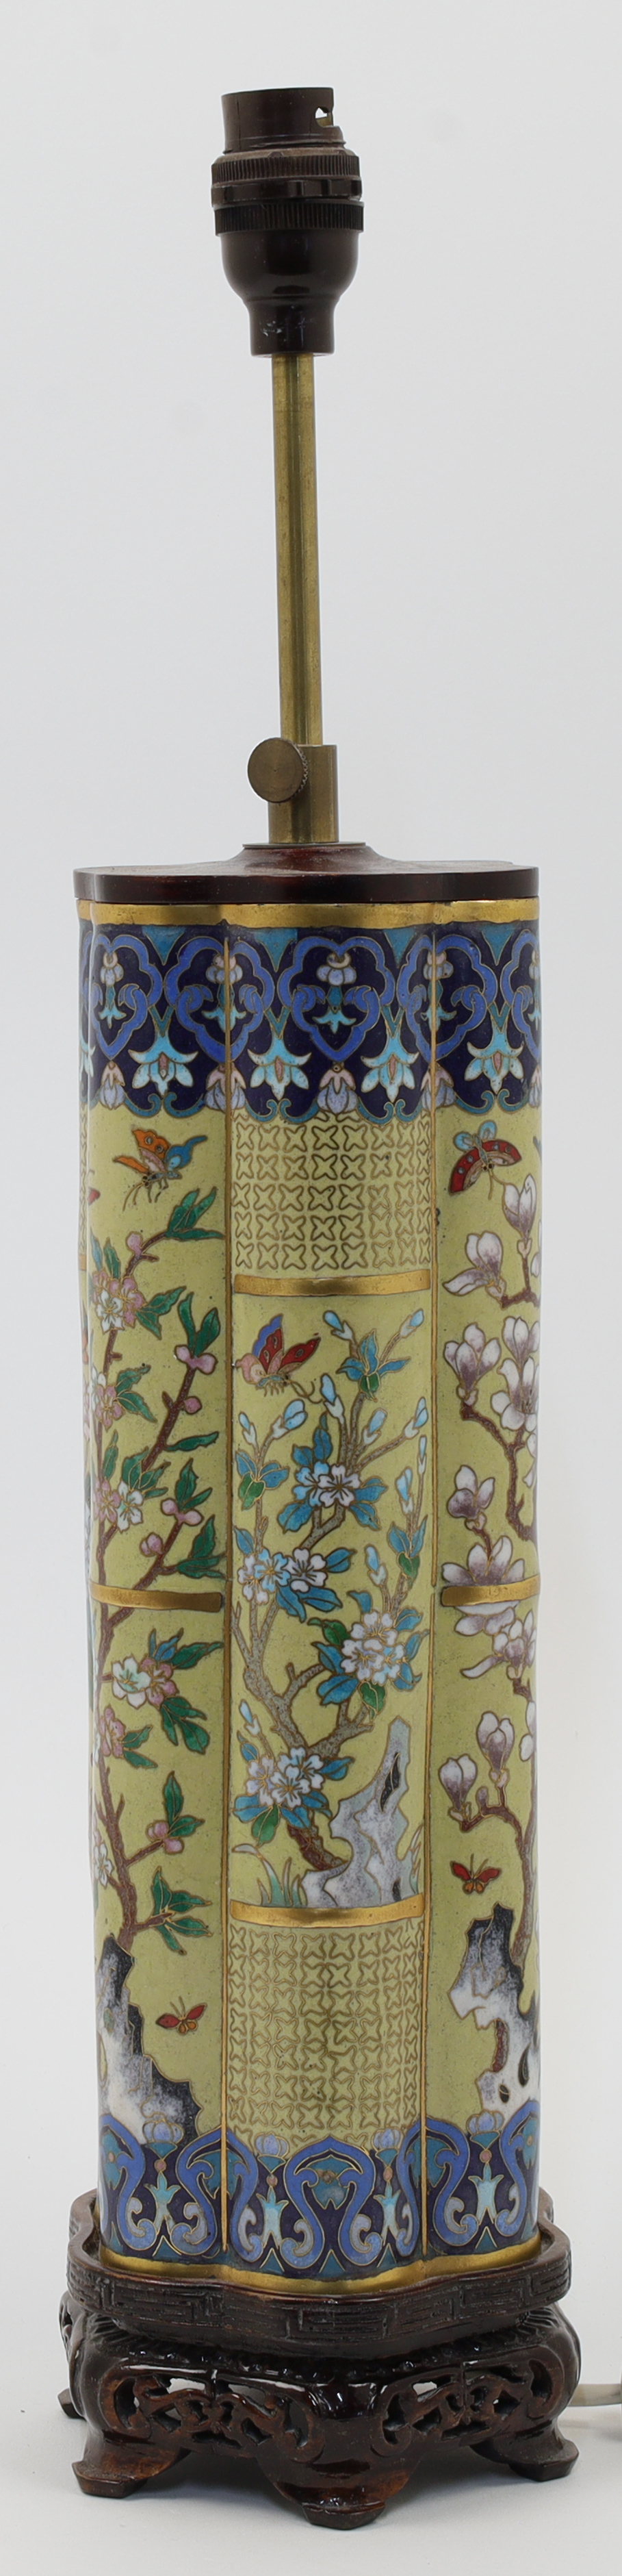 A Chinese cloisonné lobed sleeve vase converted to a lamp, late Qing / Republic period, early 20t...